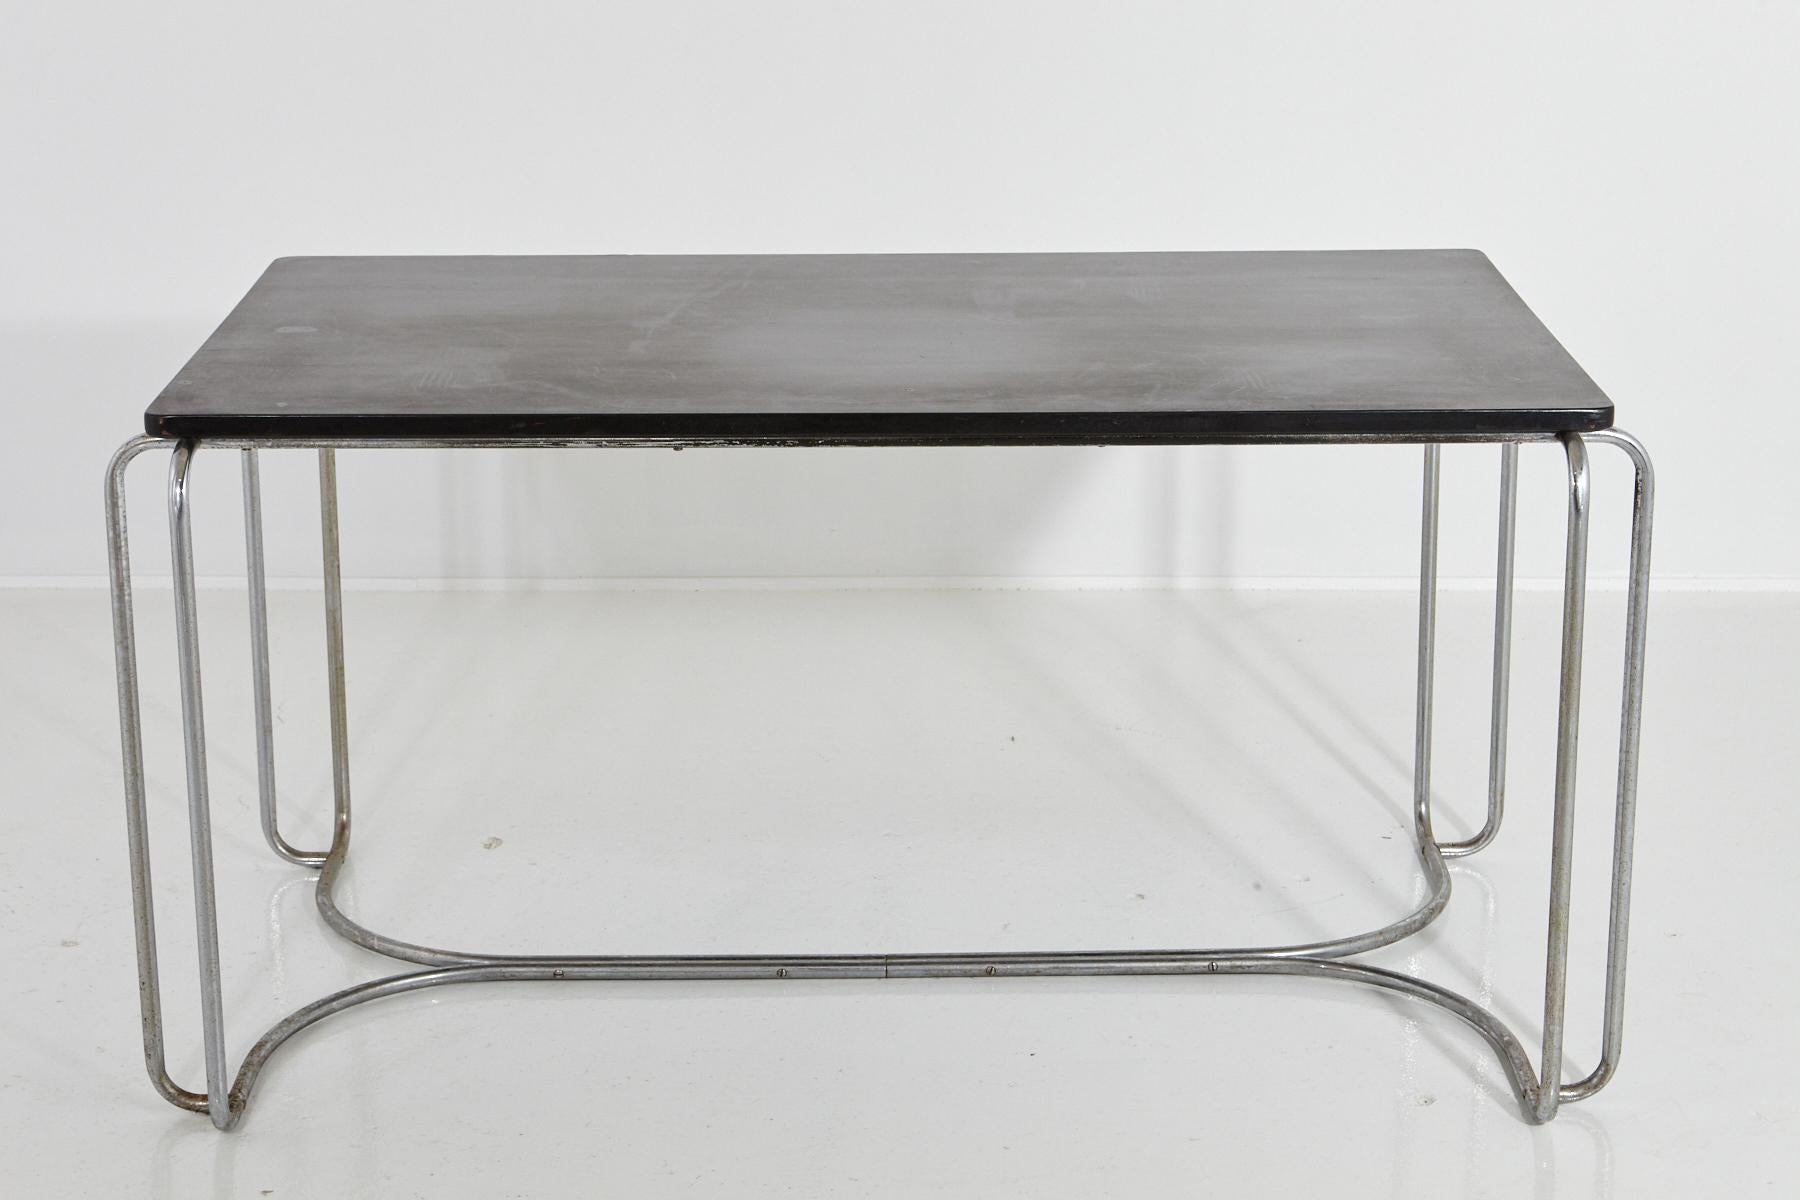 Stylish Art Deco tubular chrome desk or library table with black wooden top, attributed to Wolfgang Hoffmann.
Chrome base with round corners, black wooden top. The table has an airy, light, and streamlined appearance.

Condition: The chrome base